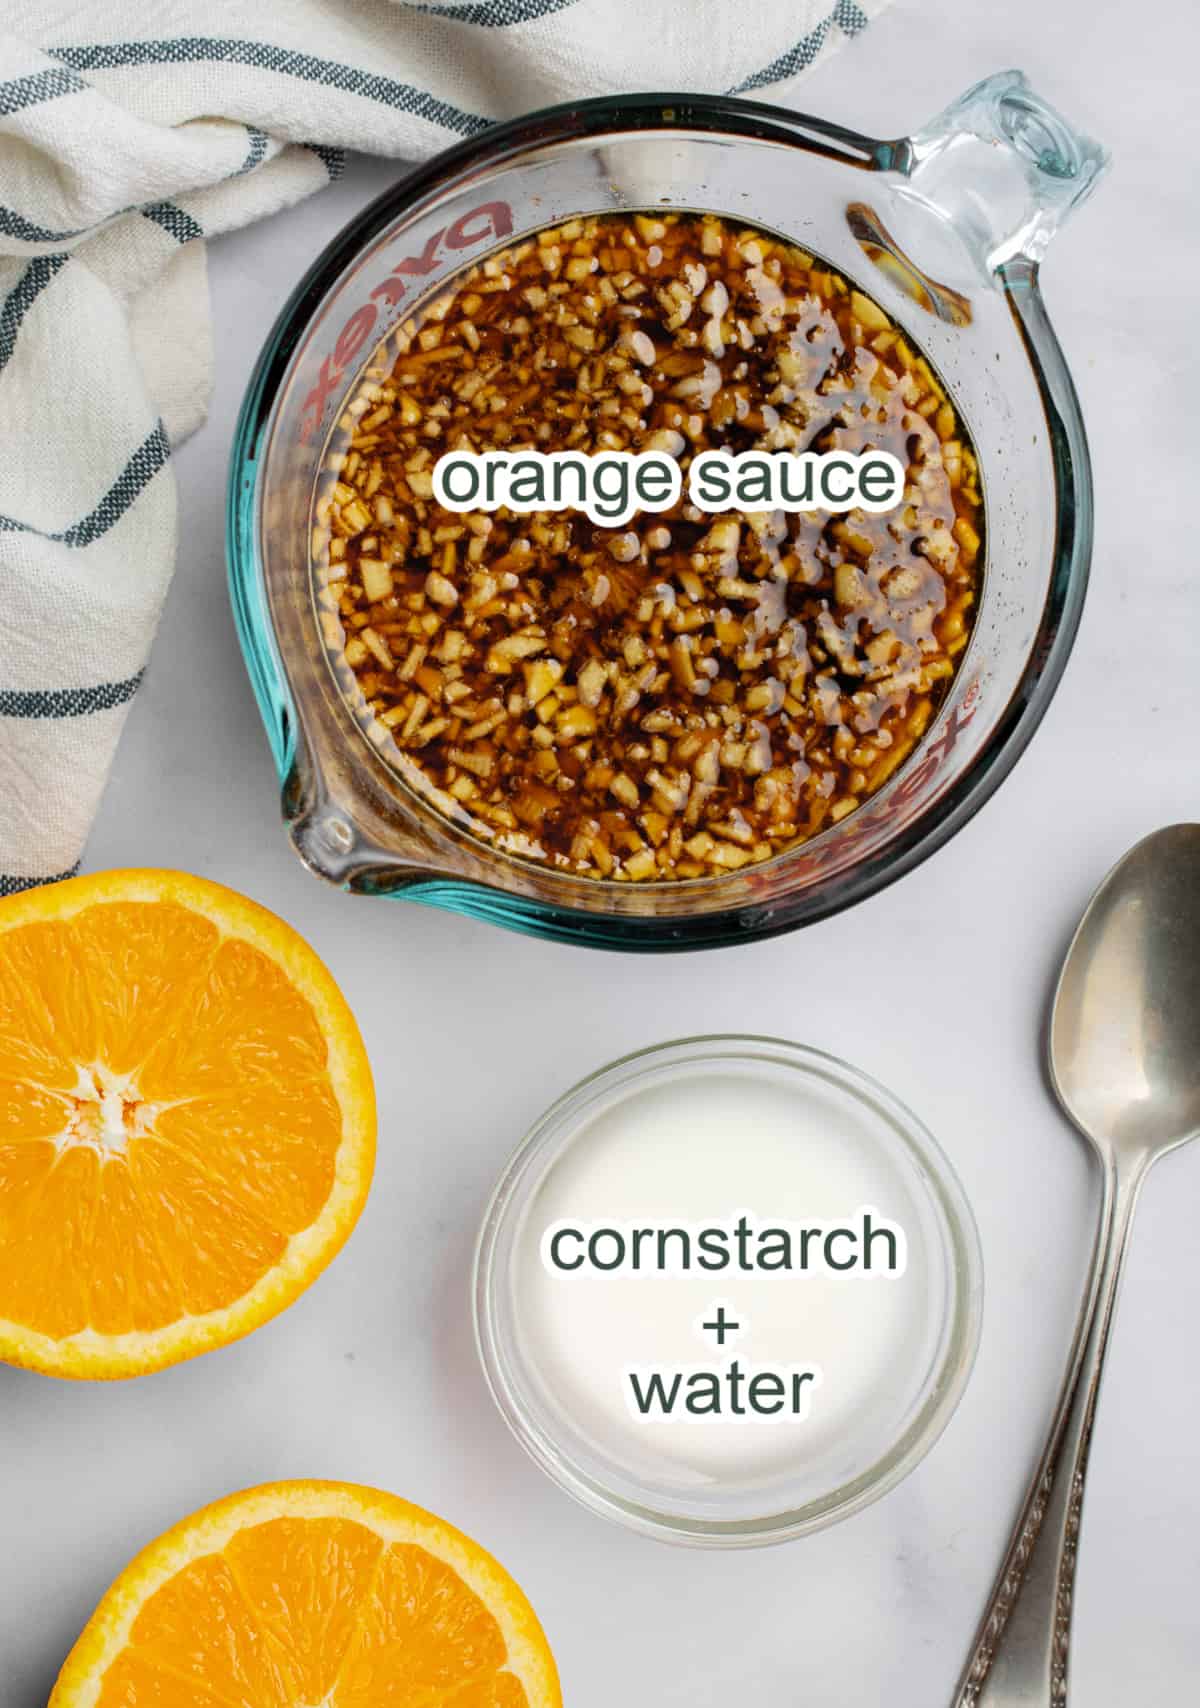 A measuring cup with sauce labeled orange sauce and a small bowl of white liquid labeled cornstarch plus water.